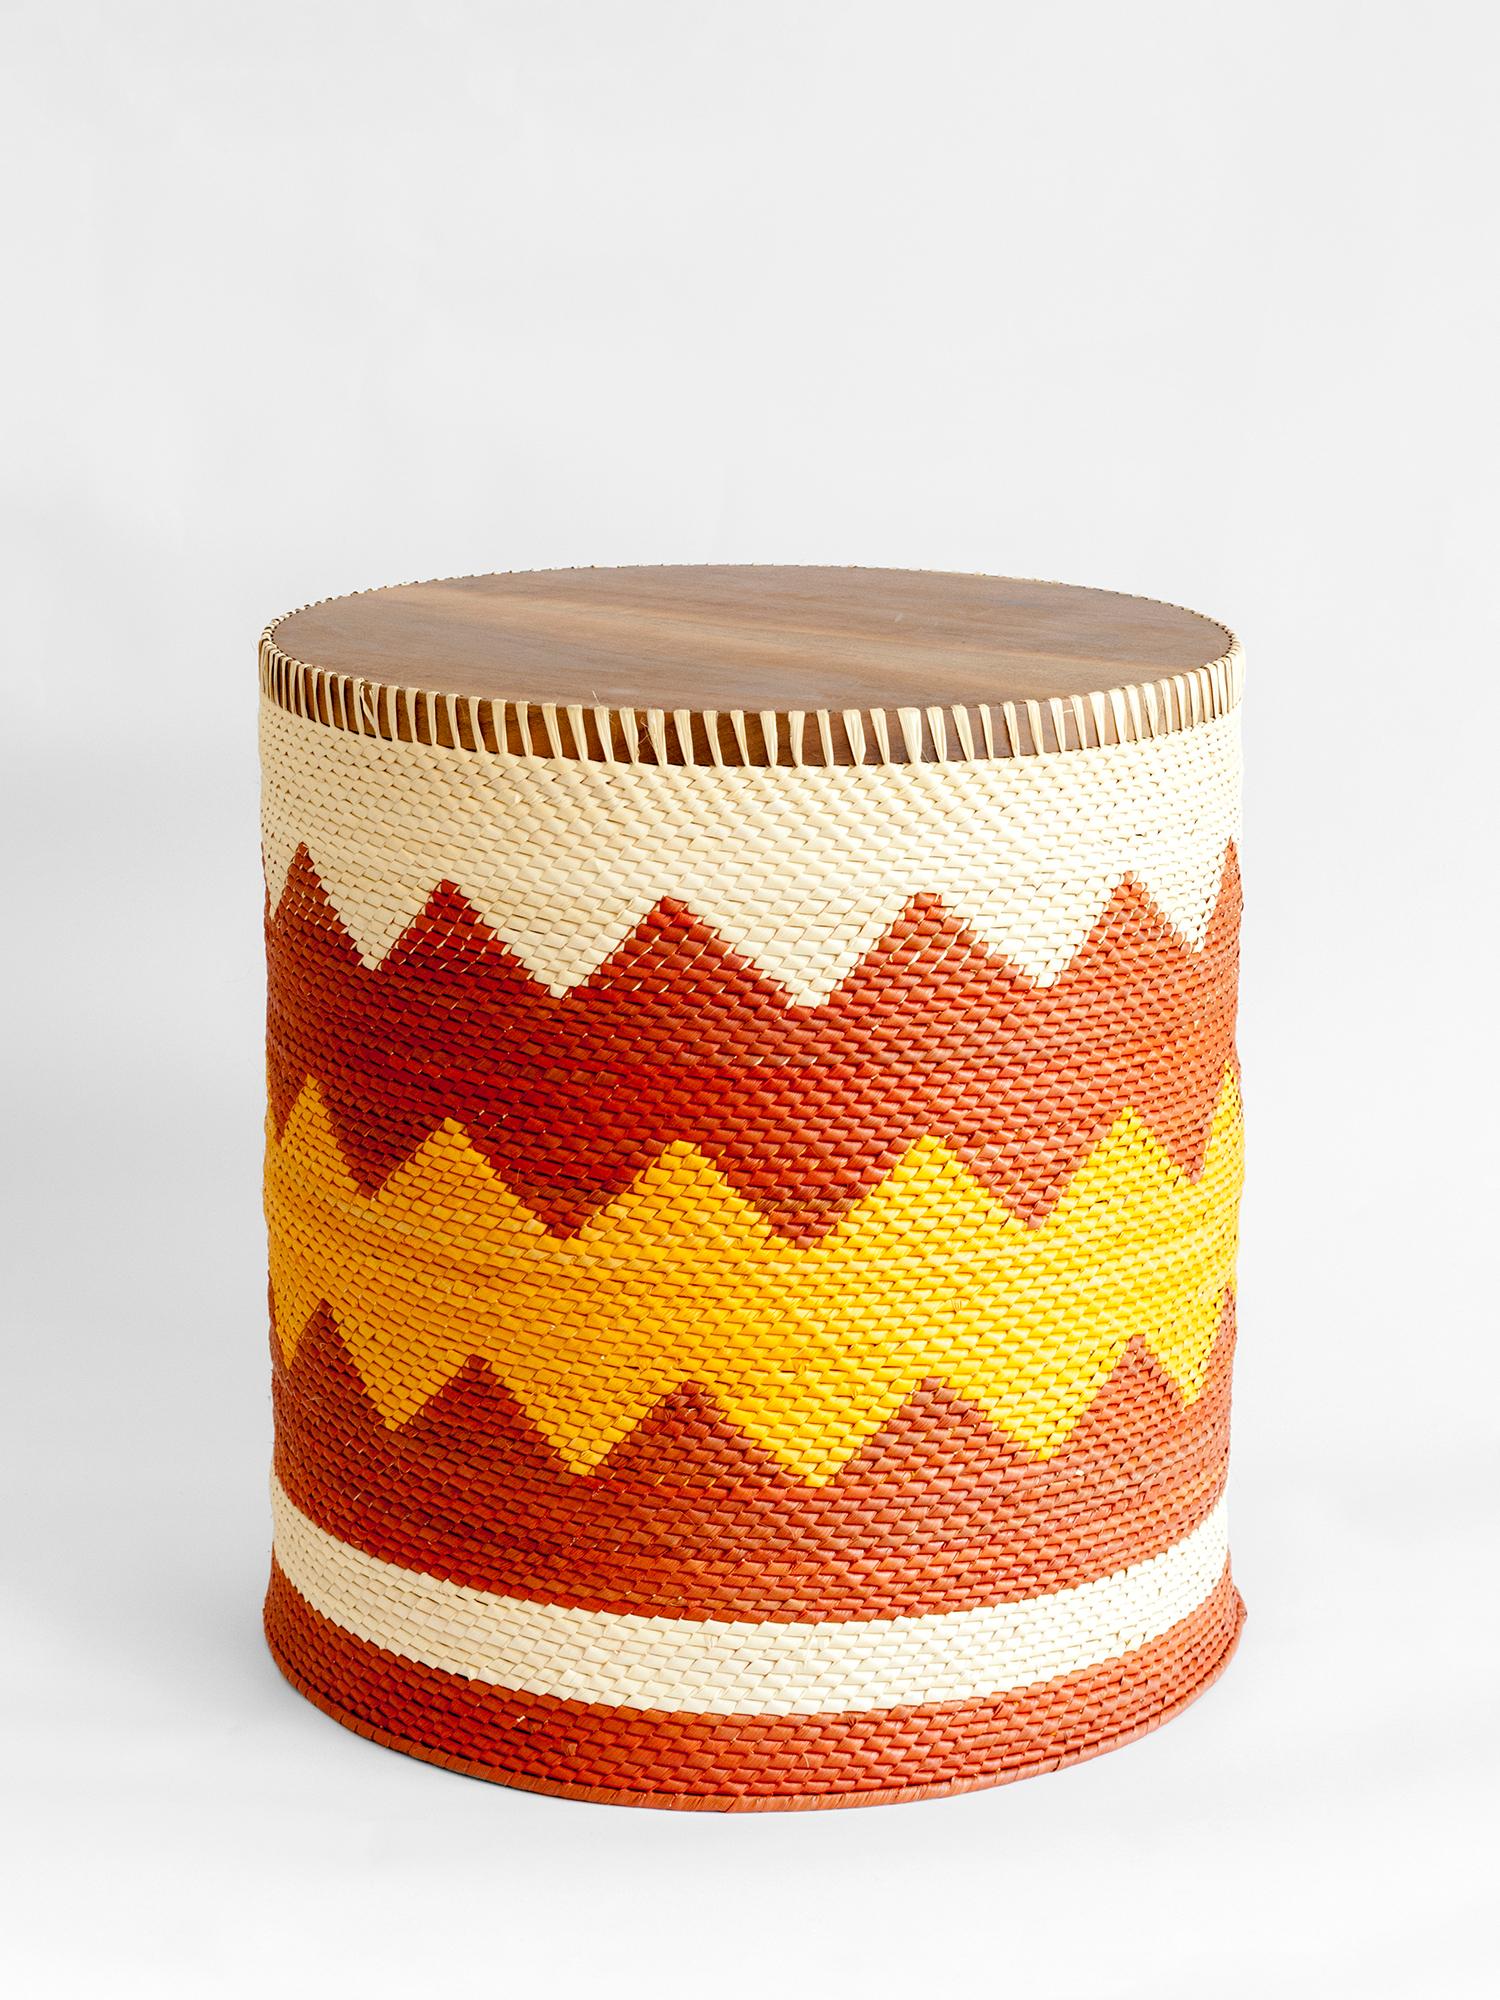 Brazilian Palafitas side table M: handcrafted in Brazil with tucumã straw and solid wood For Sale